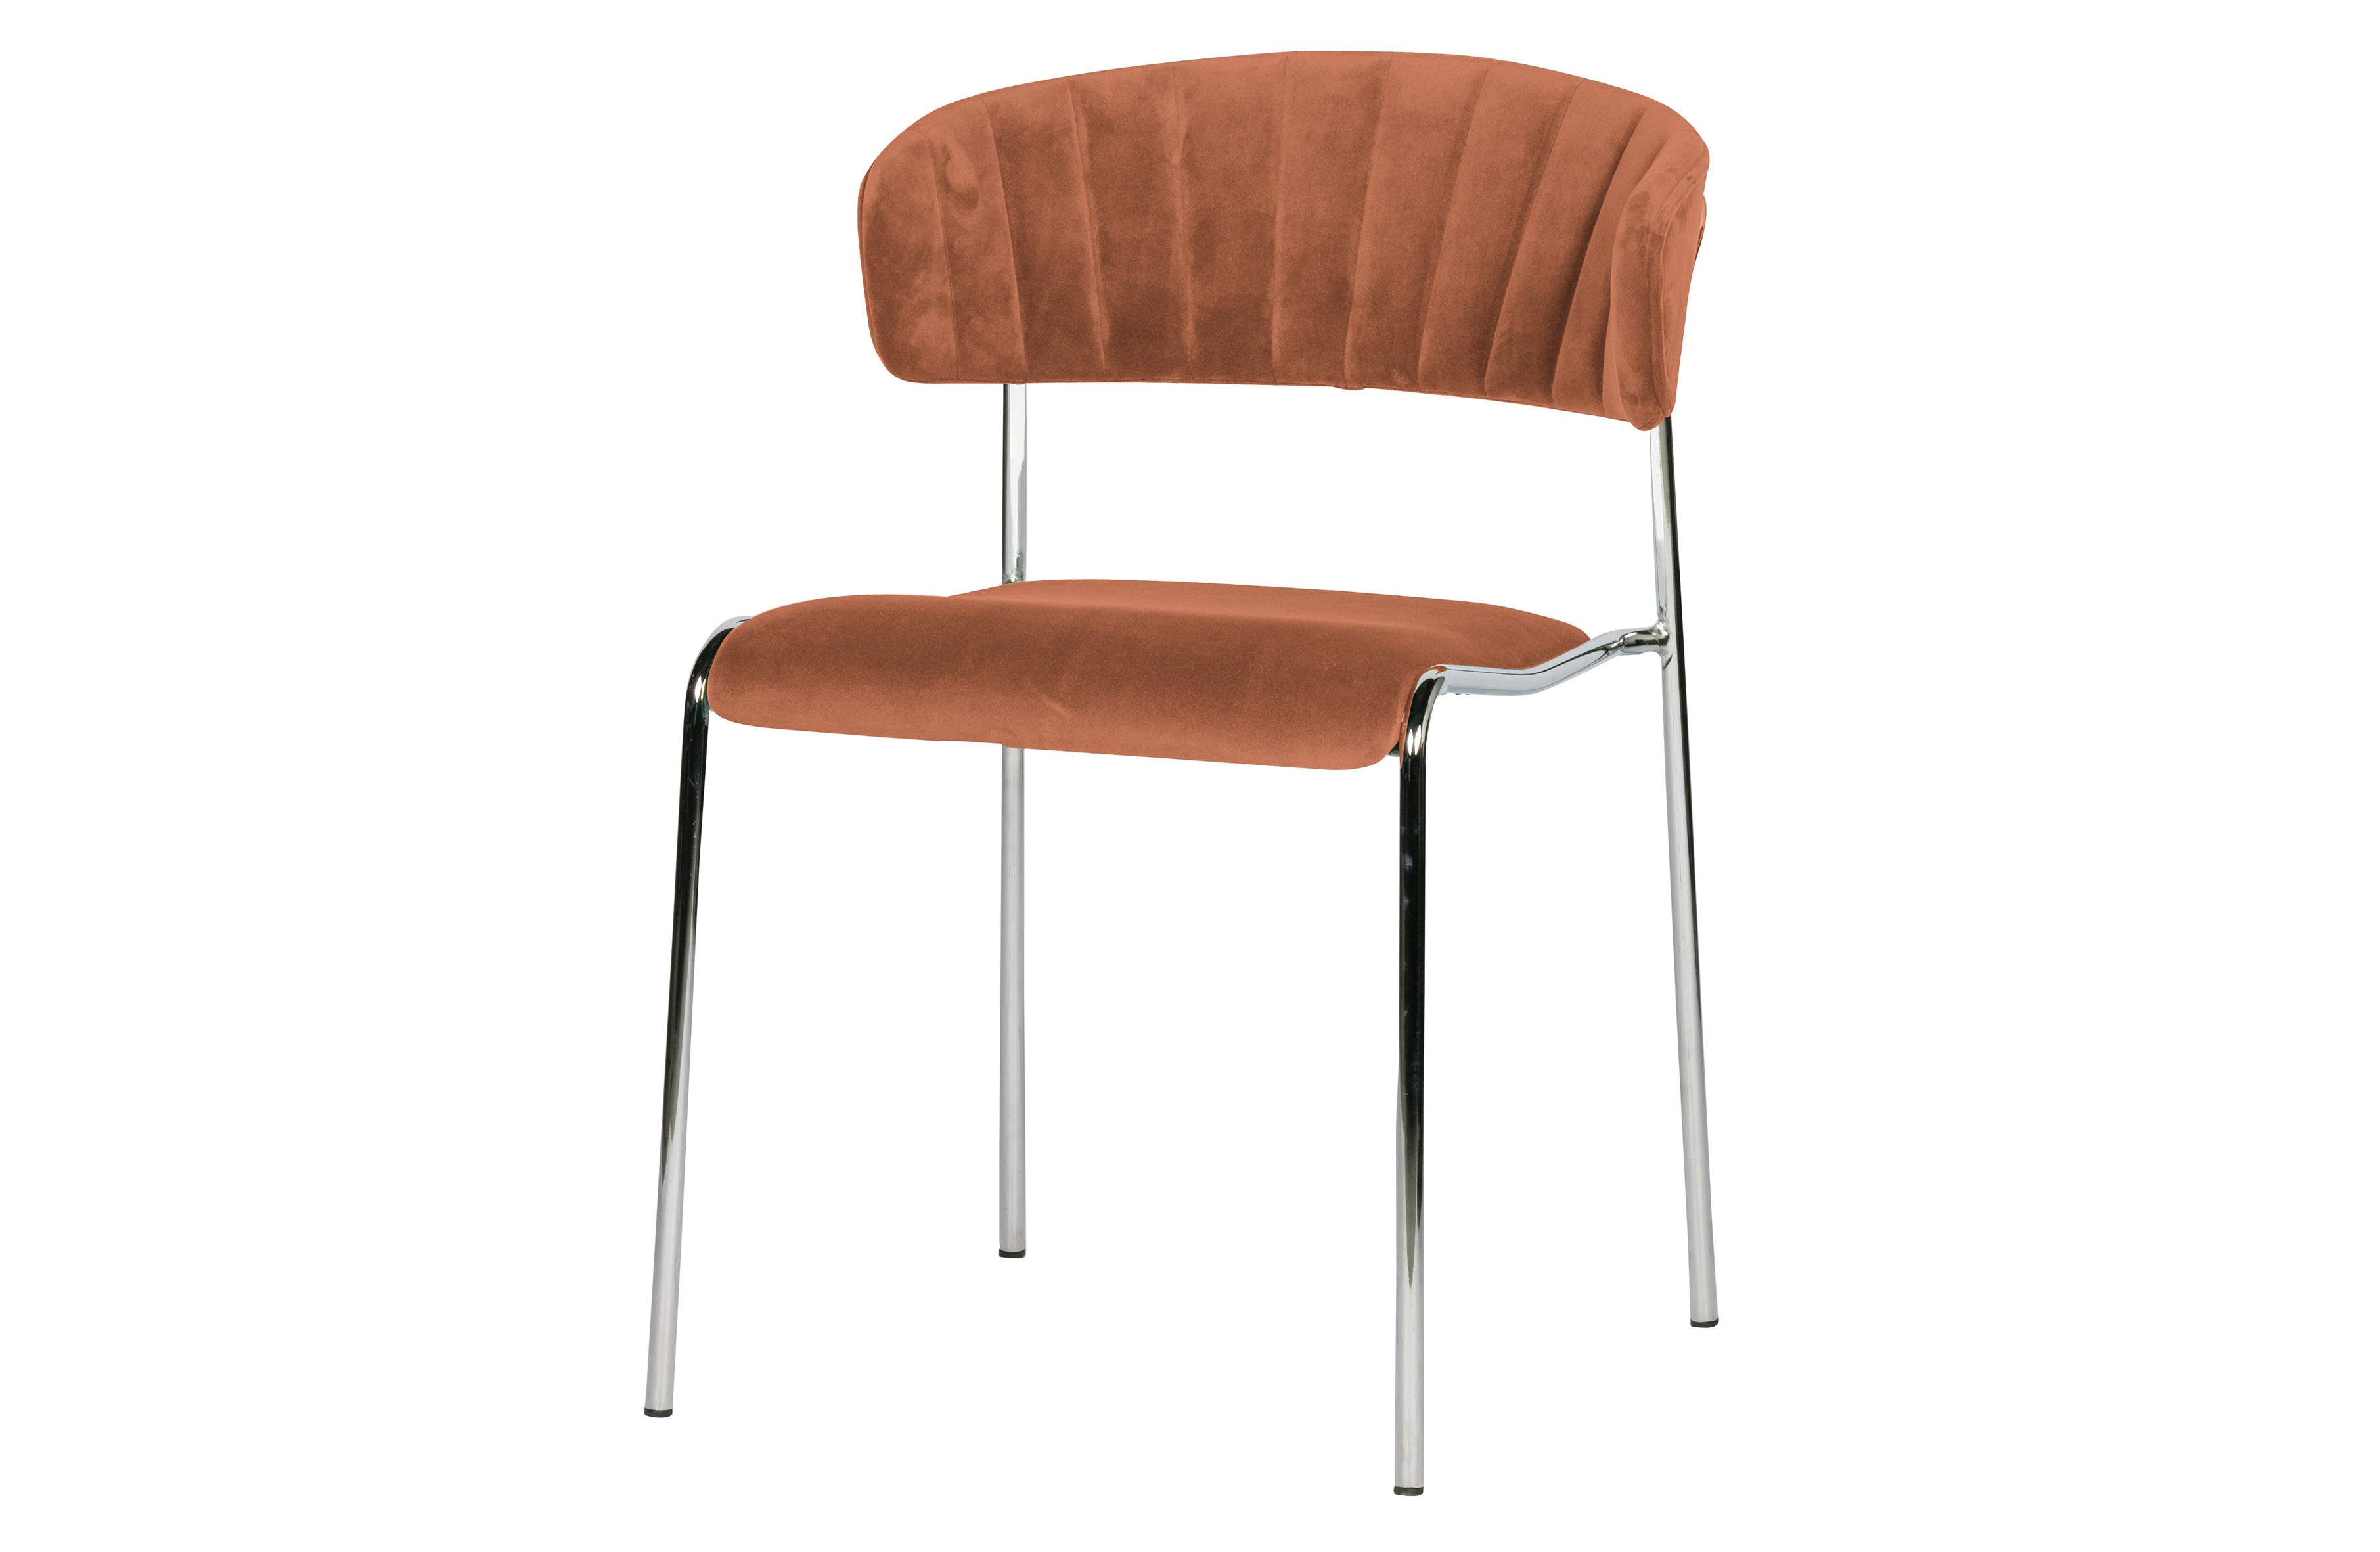 Rent a Dining chair Twitch velvet blossom? Rent at KeyPro furniture rental!